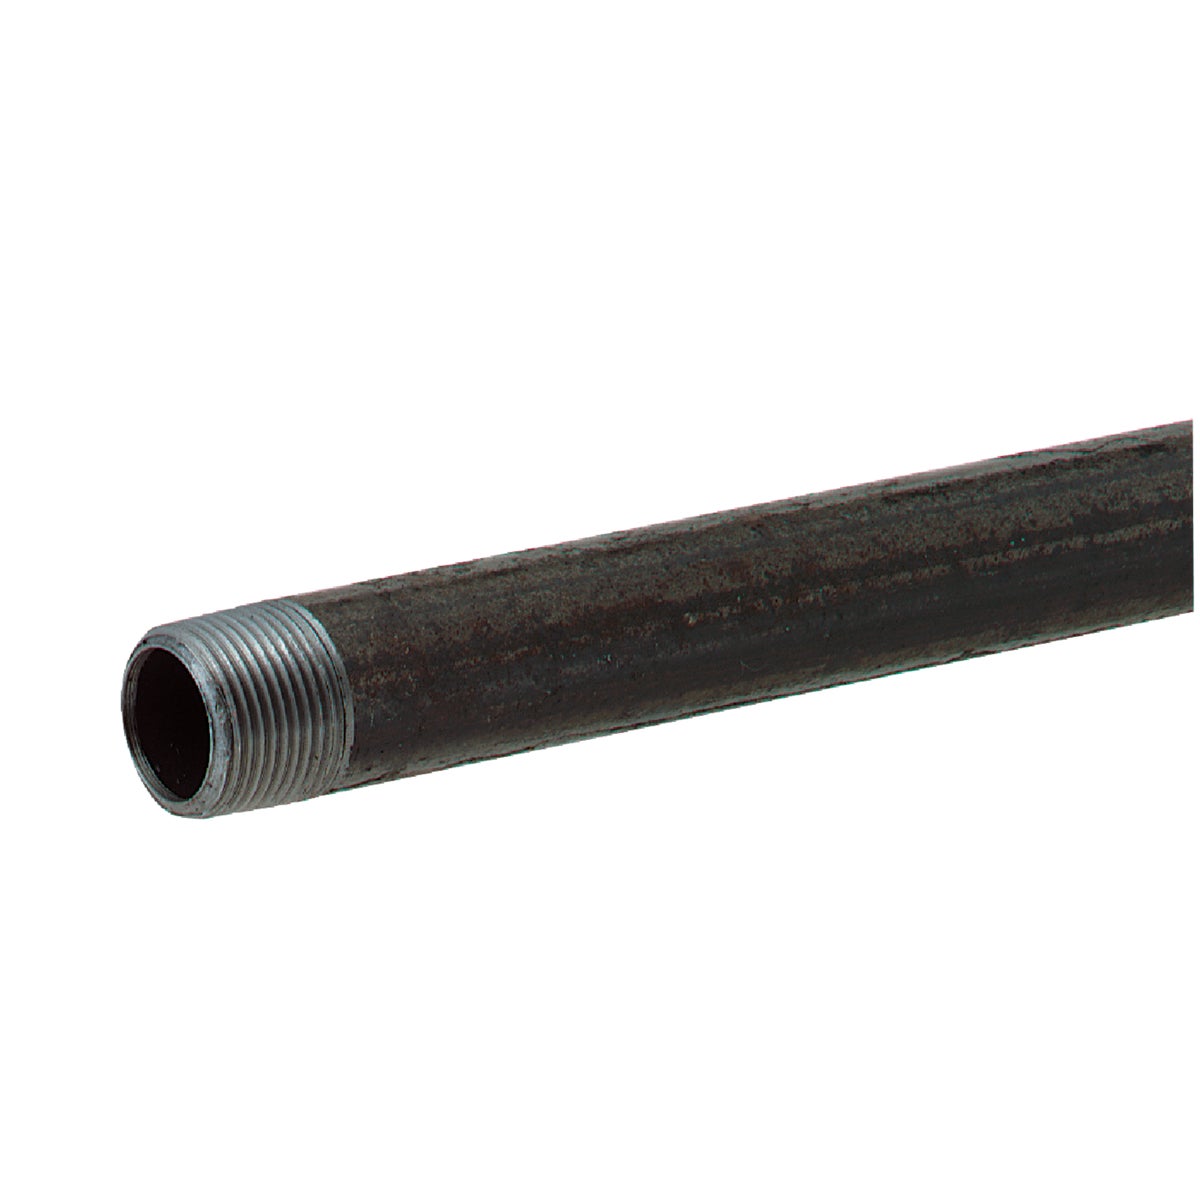 Southland 1 In. x 48 In. Carbon Steel Threaded Black Pipe